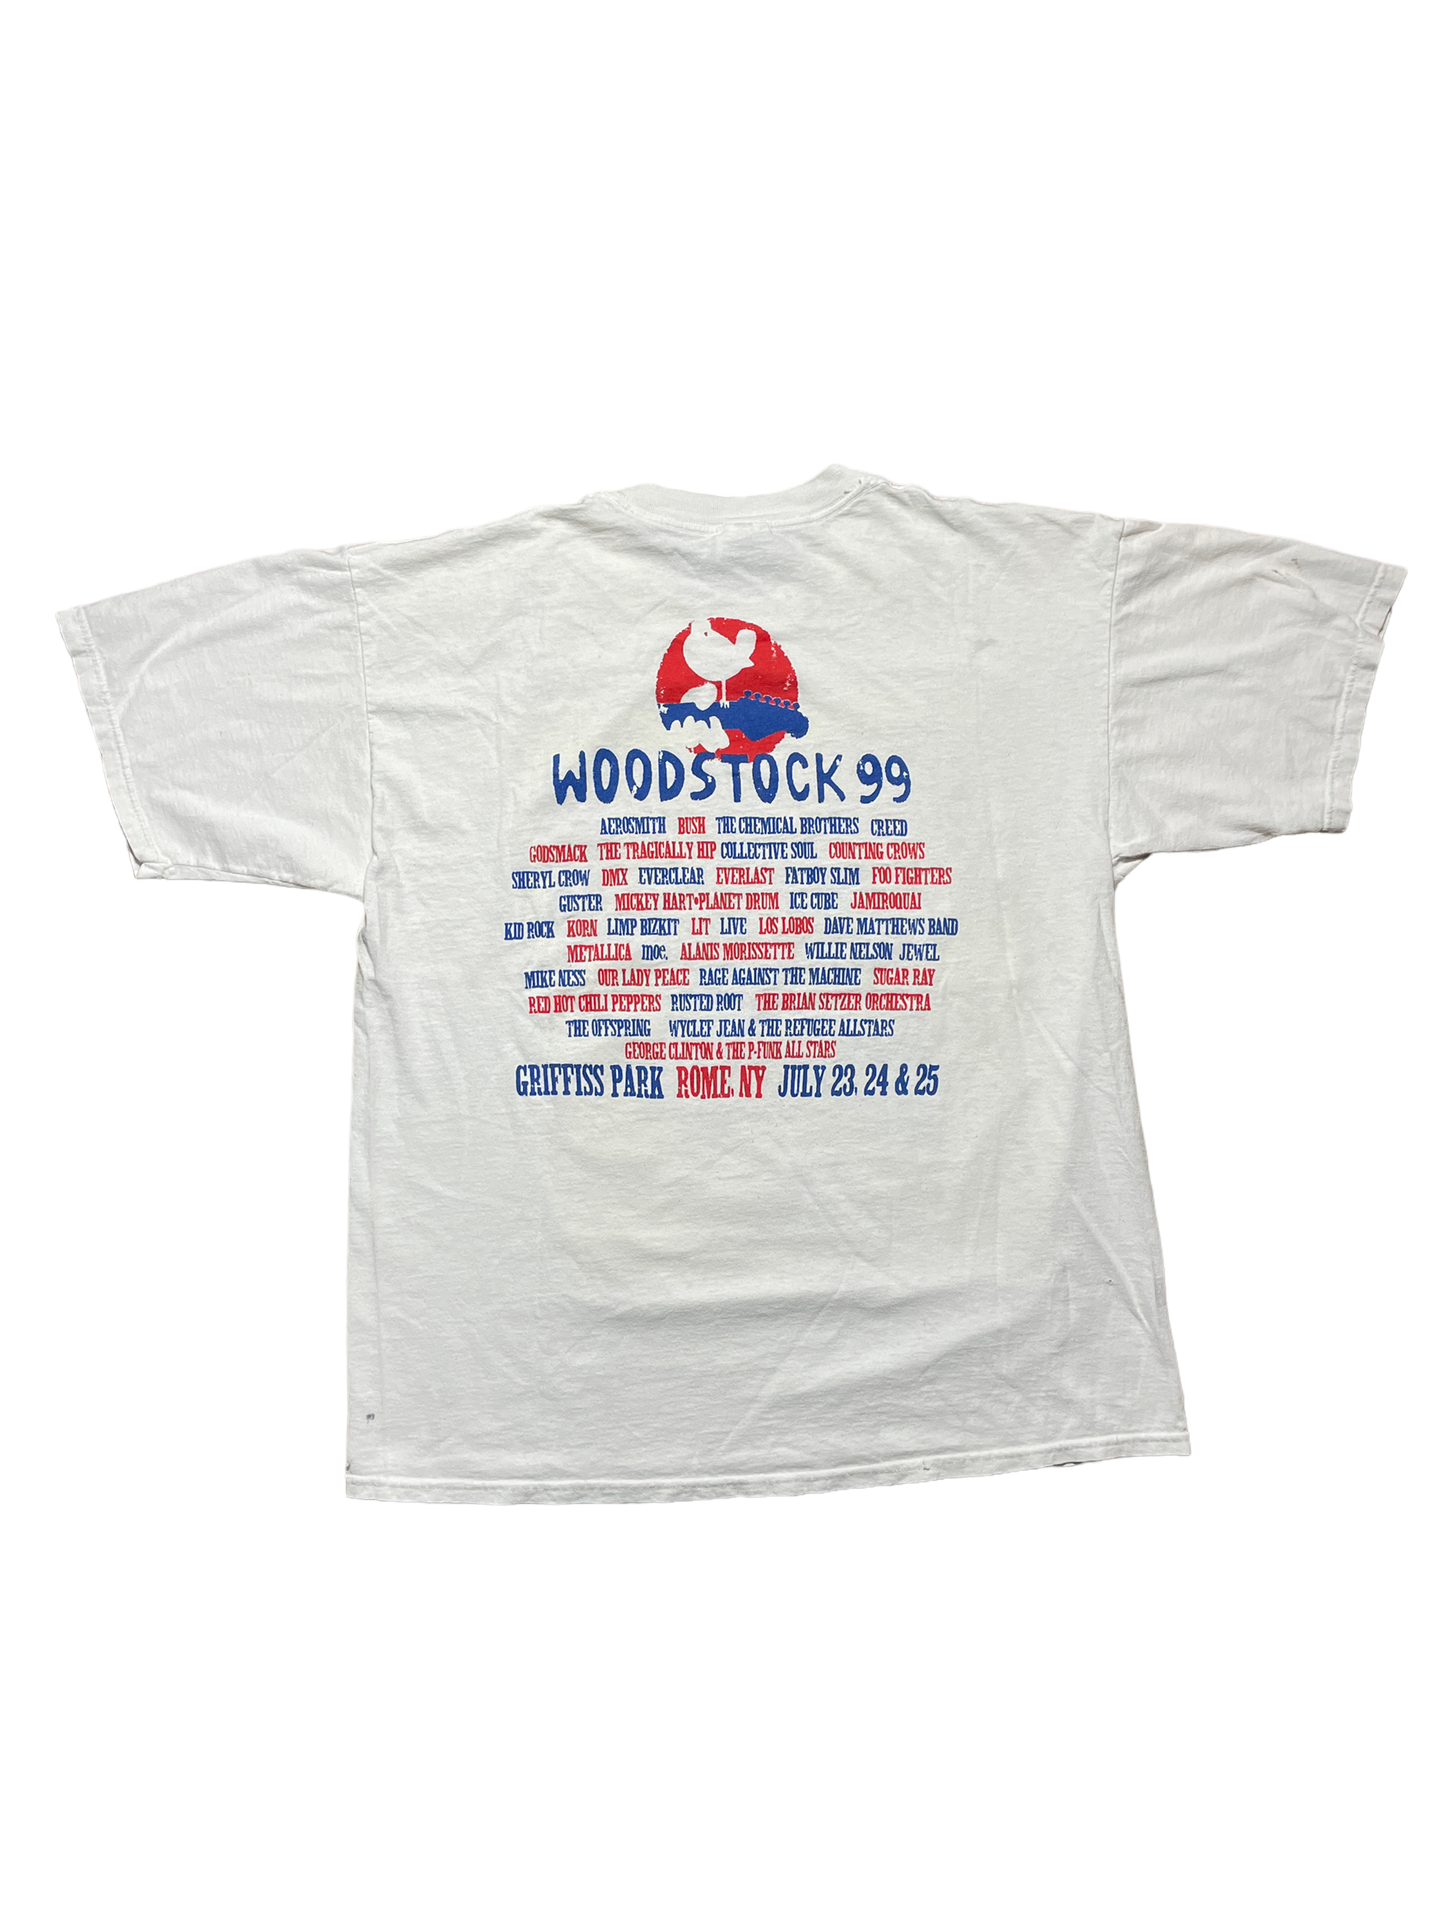 1999 Woodstock 99 Featuring Metallica, Rage Against the Machine, Red Hot Chilli Peppers Graphic Tee